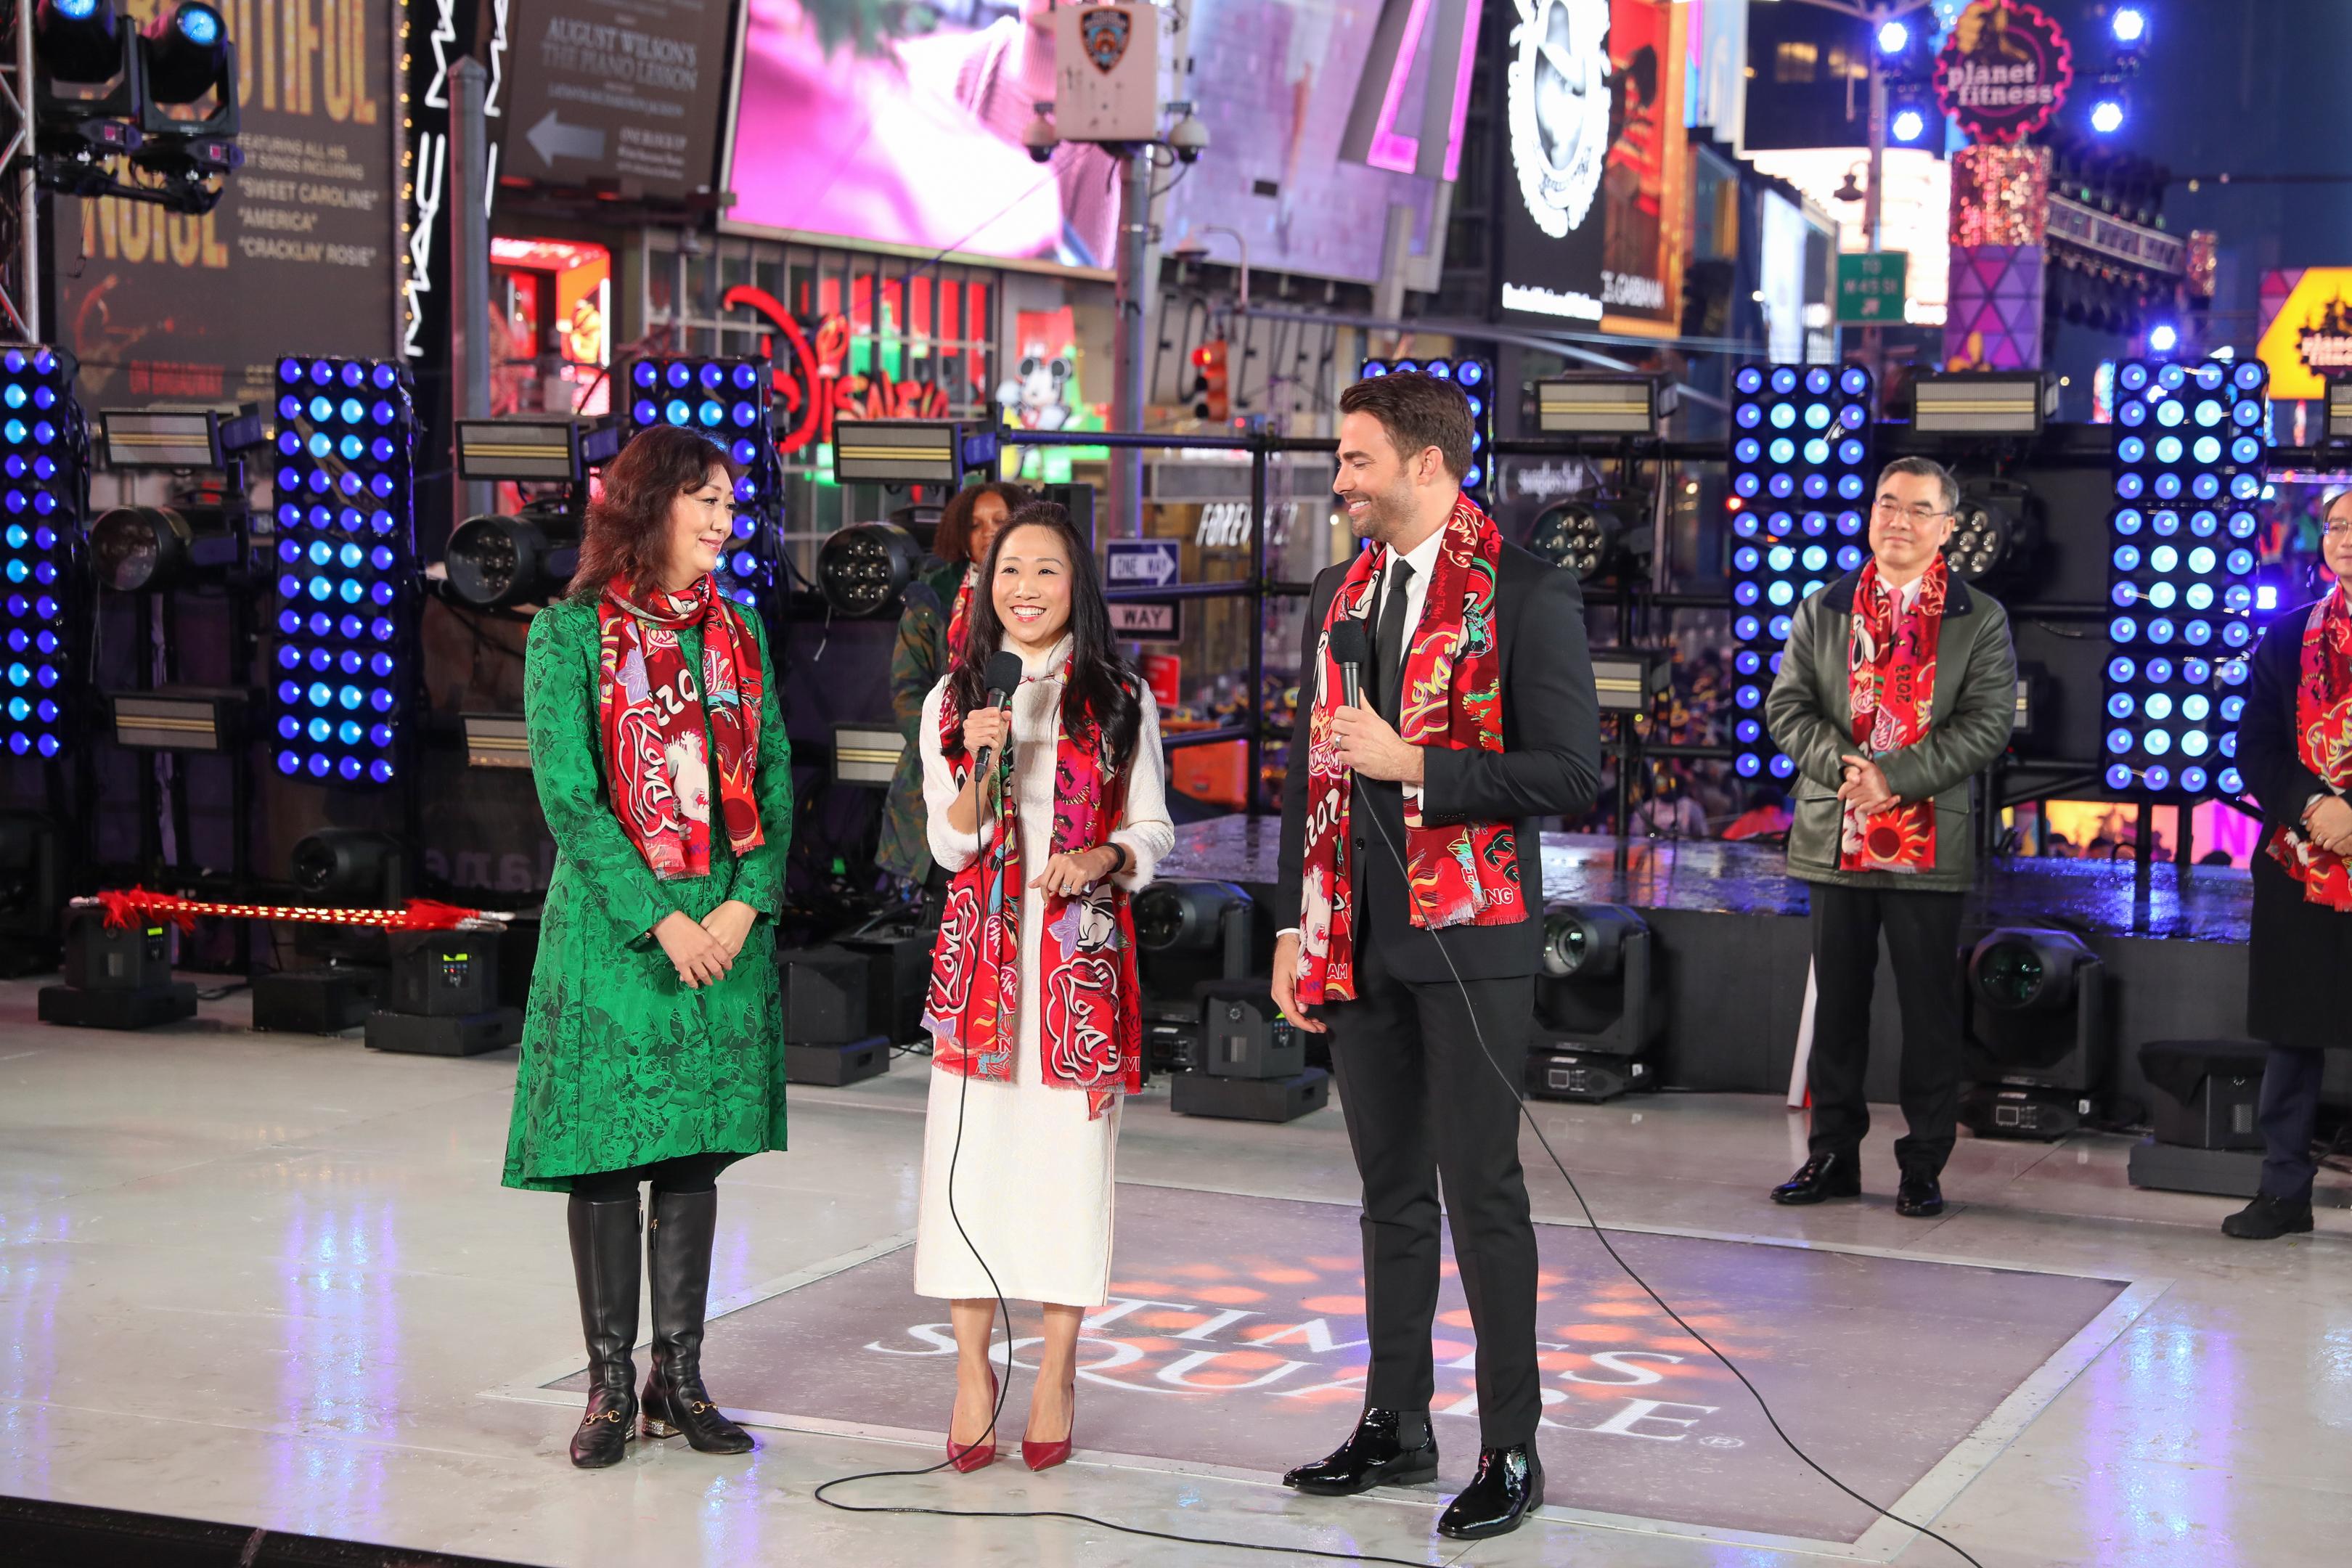 Hong Kong artists enthralled a worldwide audience by kicking off the New York Times Square countdown celebration with a "Kung Fu Contemporary Circus" on December 31, 2022 (New York time). Speaking at the opening ceremony, the Director of the Hong Kong Economic and Trade Office in New York, Ms Candy Nip (centre), said Hong Kong was thrilled to be part of this iconic event, with the artists as ambassadors for Hong Kong, showcasing the flair and artistry of Hong Kong while building friendship across cultures.